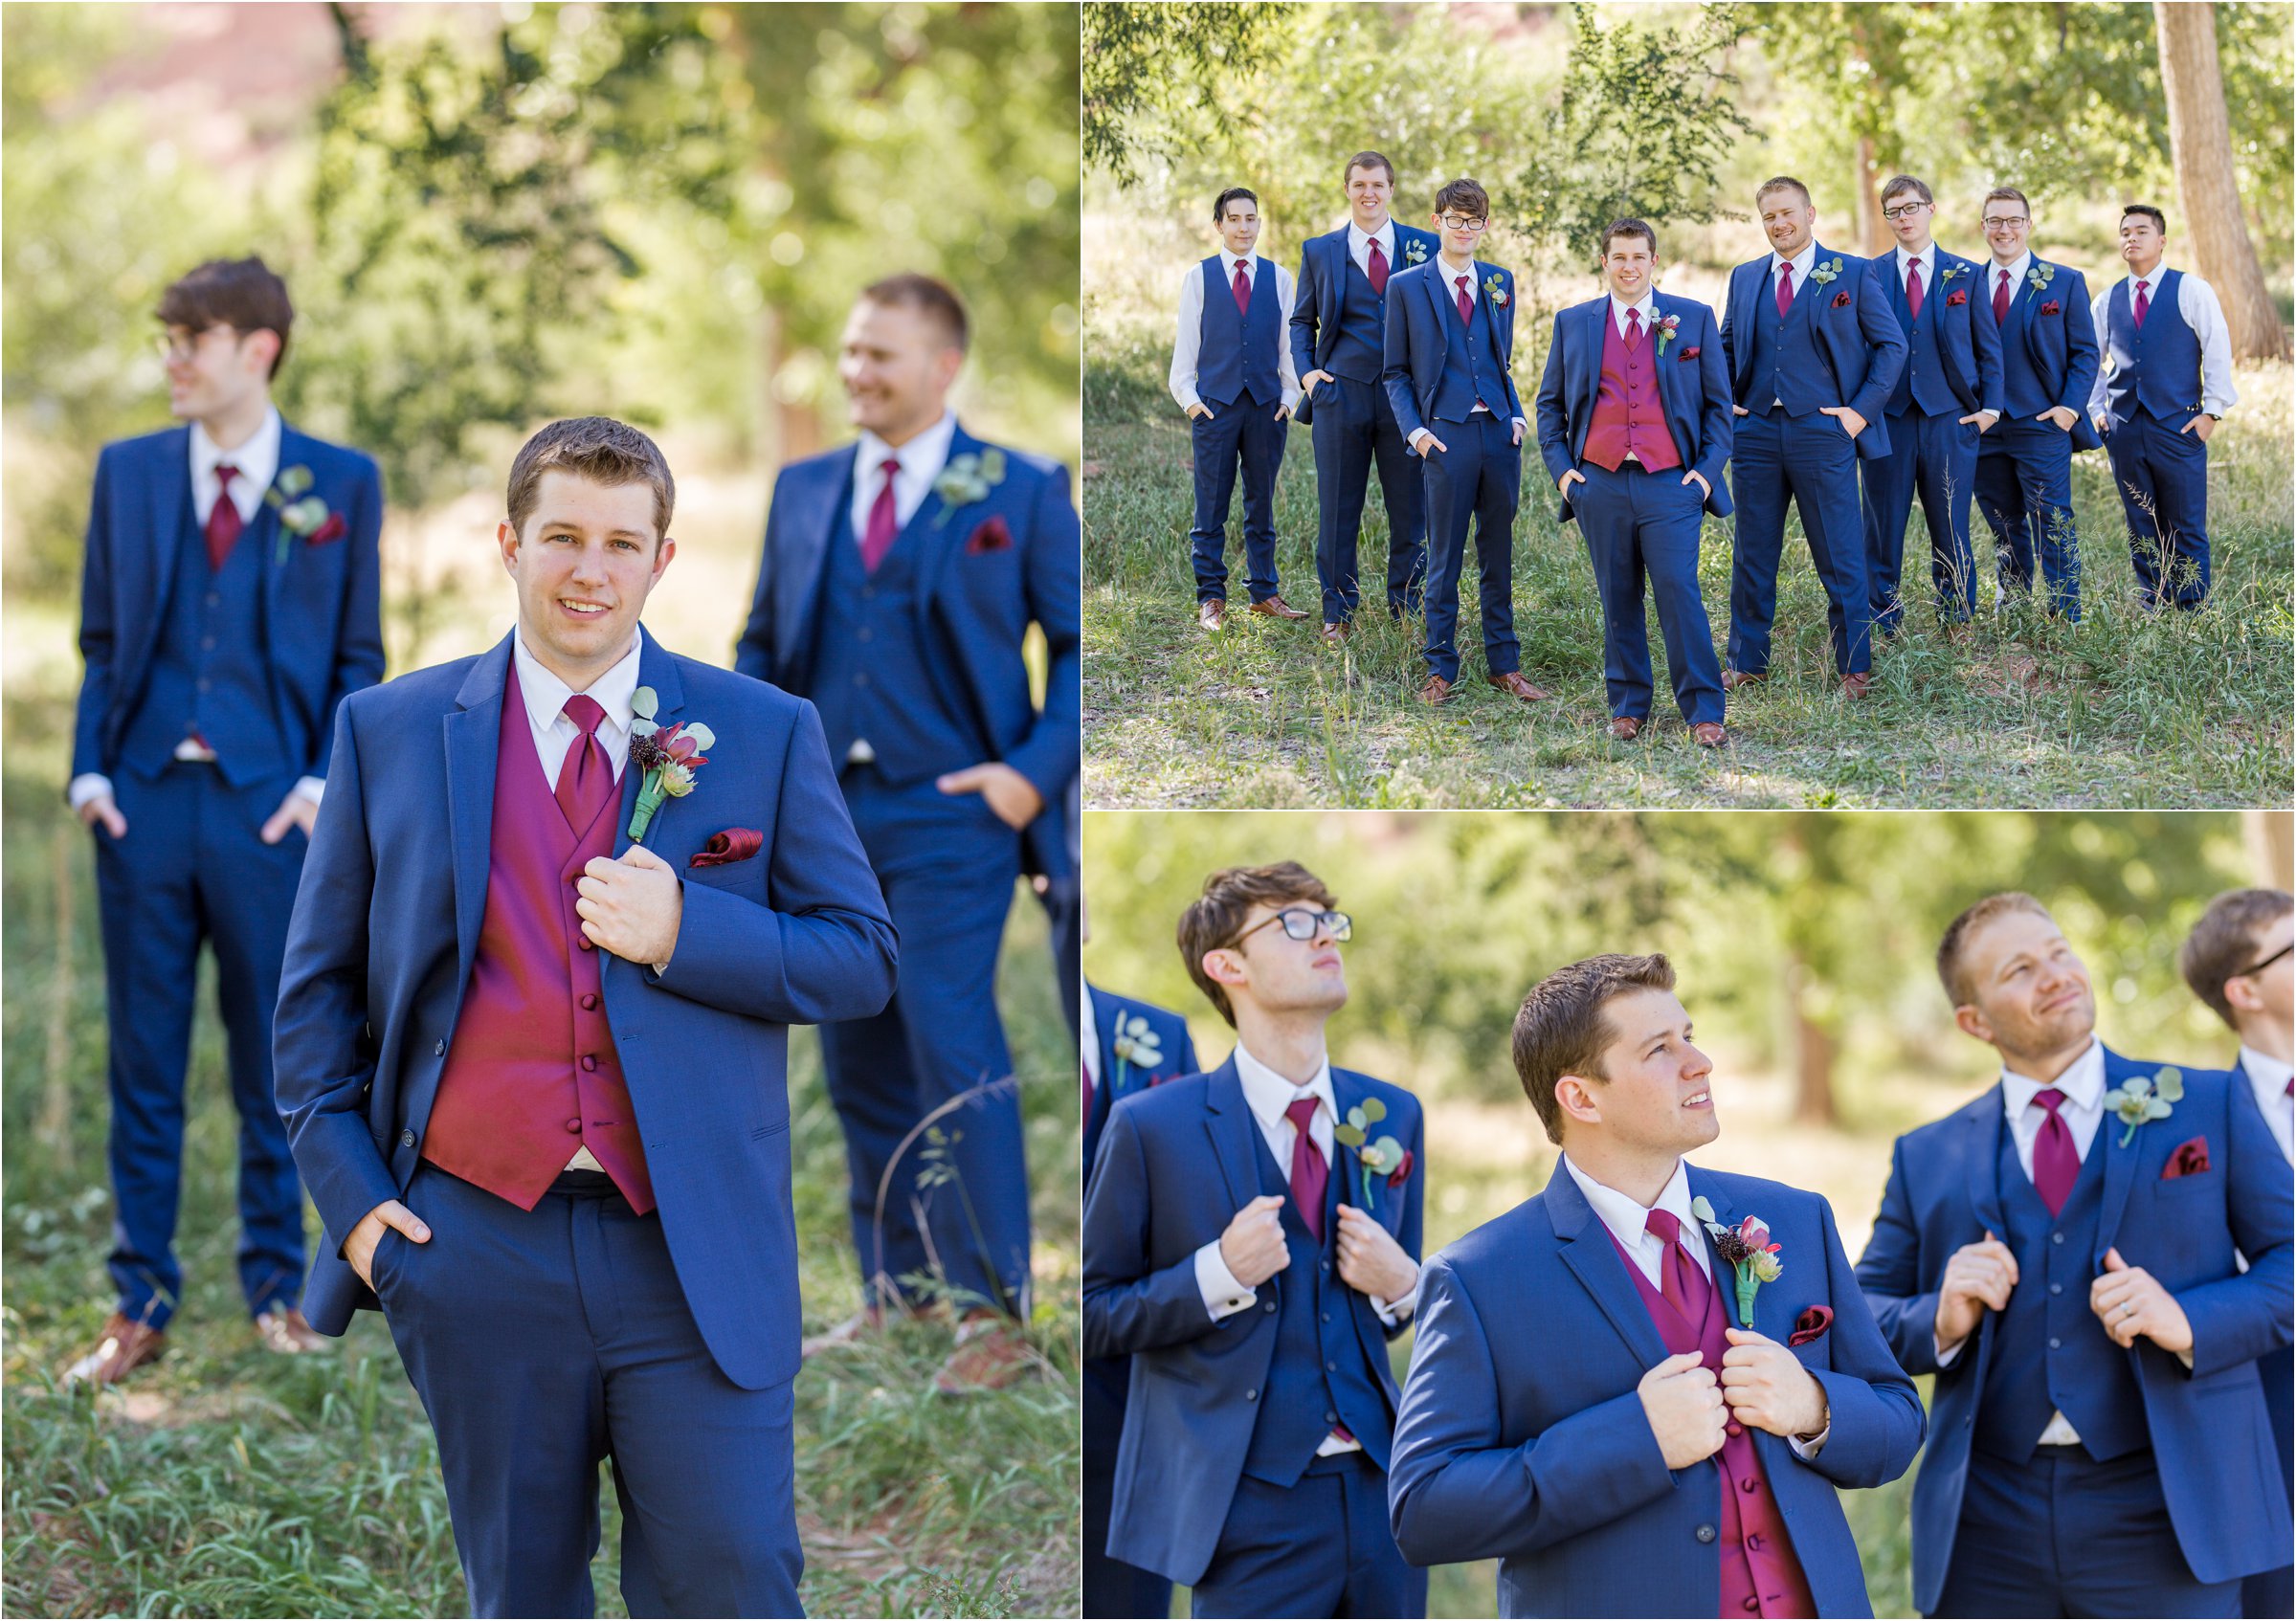 groom poses with groomsmen in blue suits with red vests for photos before his wedding